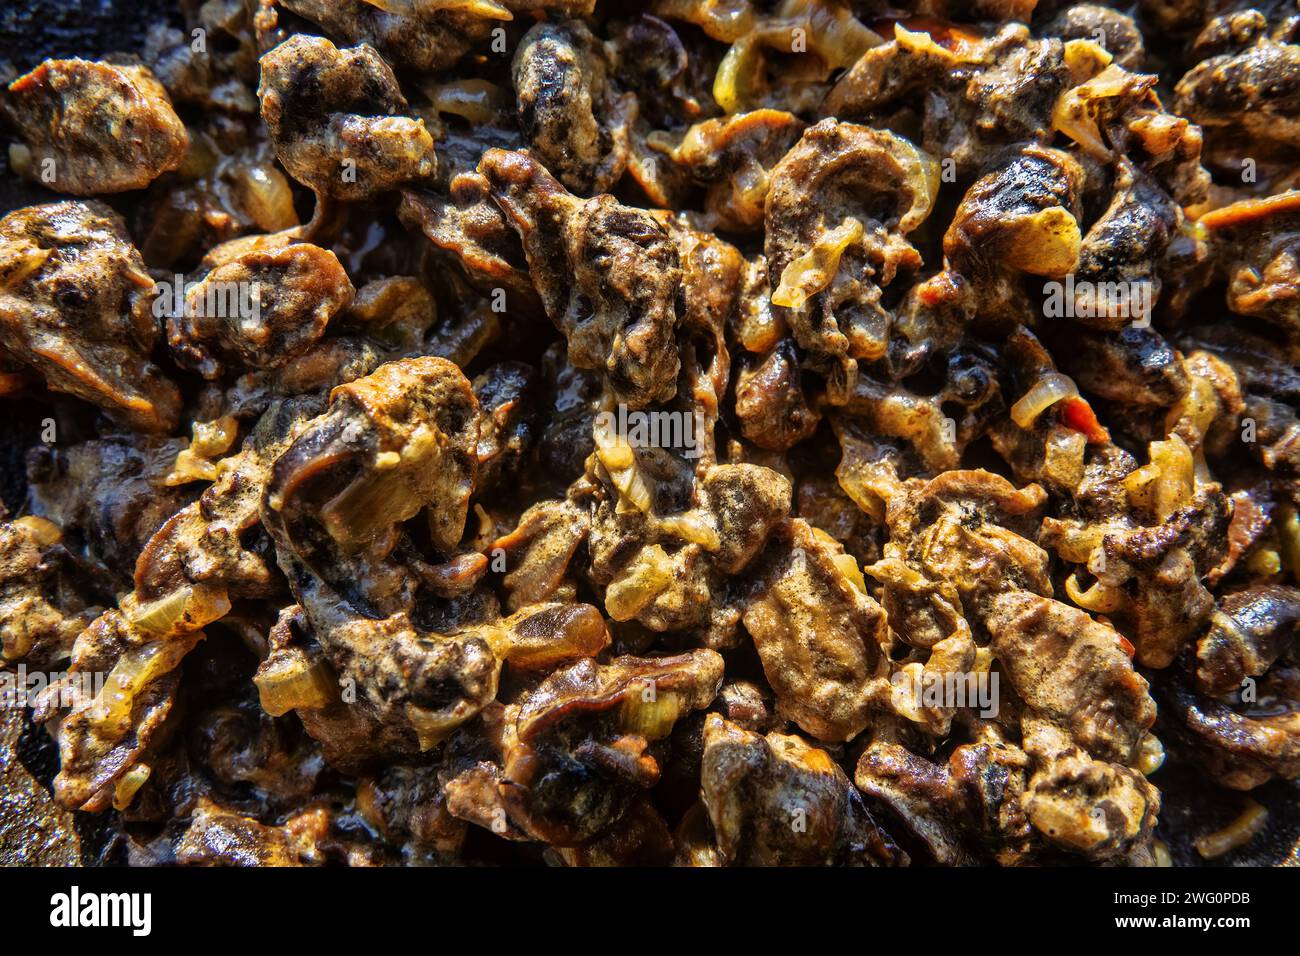 Hiker's food. Grape snails fried in a frying pan with vegetables Stock Photo